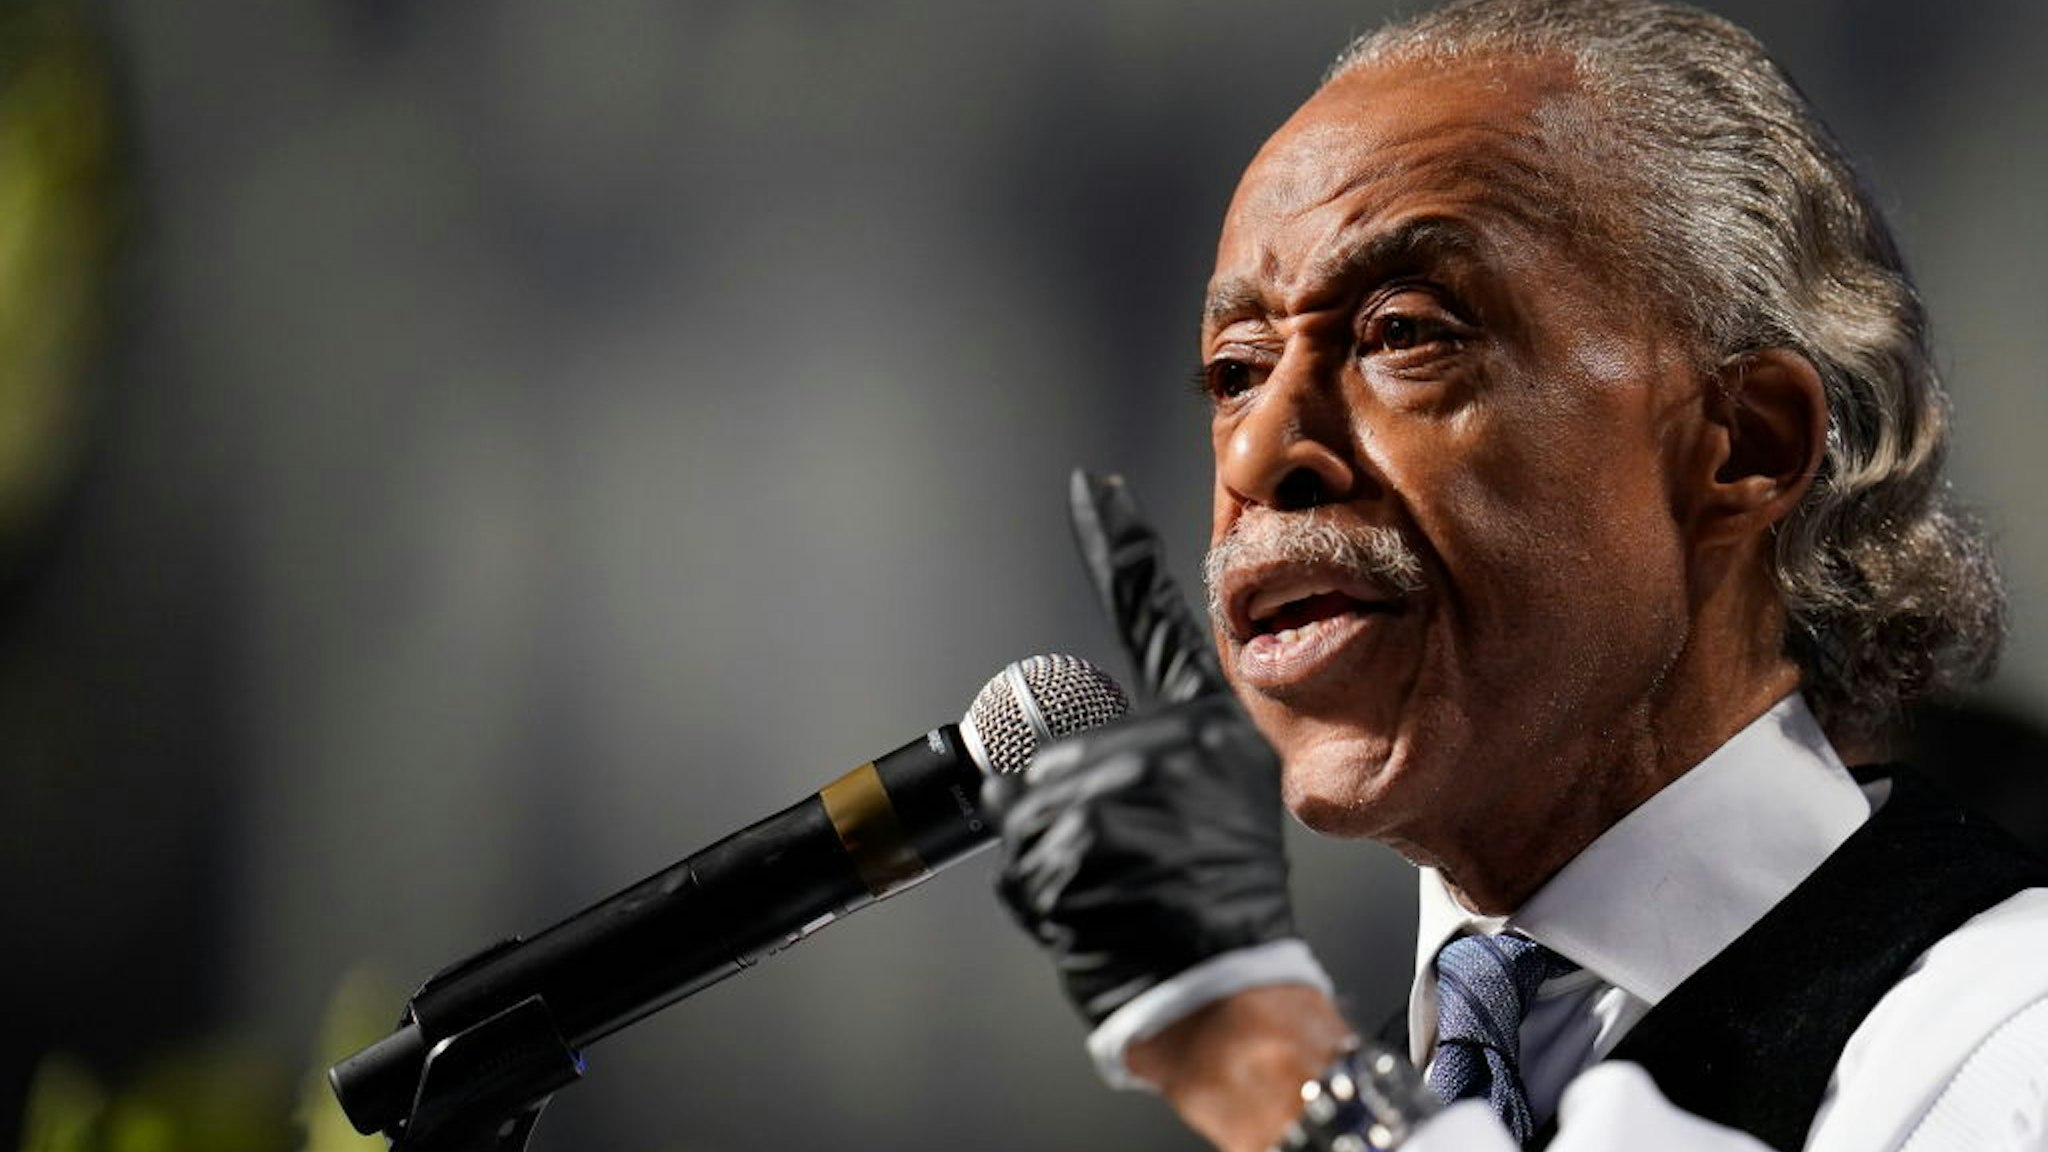 The Rev. Al Sharpton speaks at the funeral service for George Floyd in the chapel at the Fountain of Praise church June 9, 2020 in Houston, Texas. Floyd died May 25 while in Minneapolis police custody, sparking nationwide protests. (Photo by David J. Phillip-Pool/Getty Images)